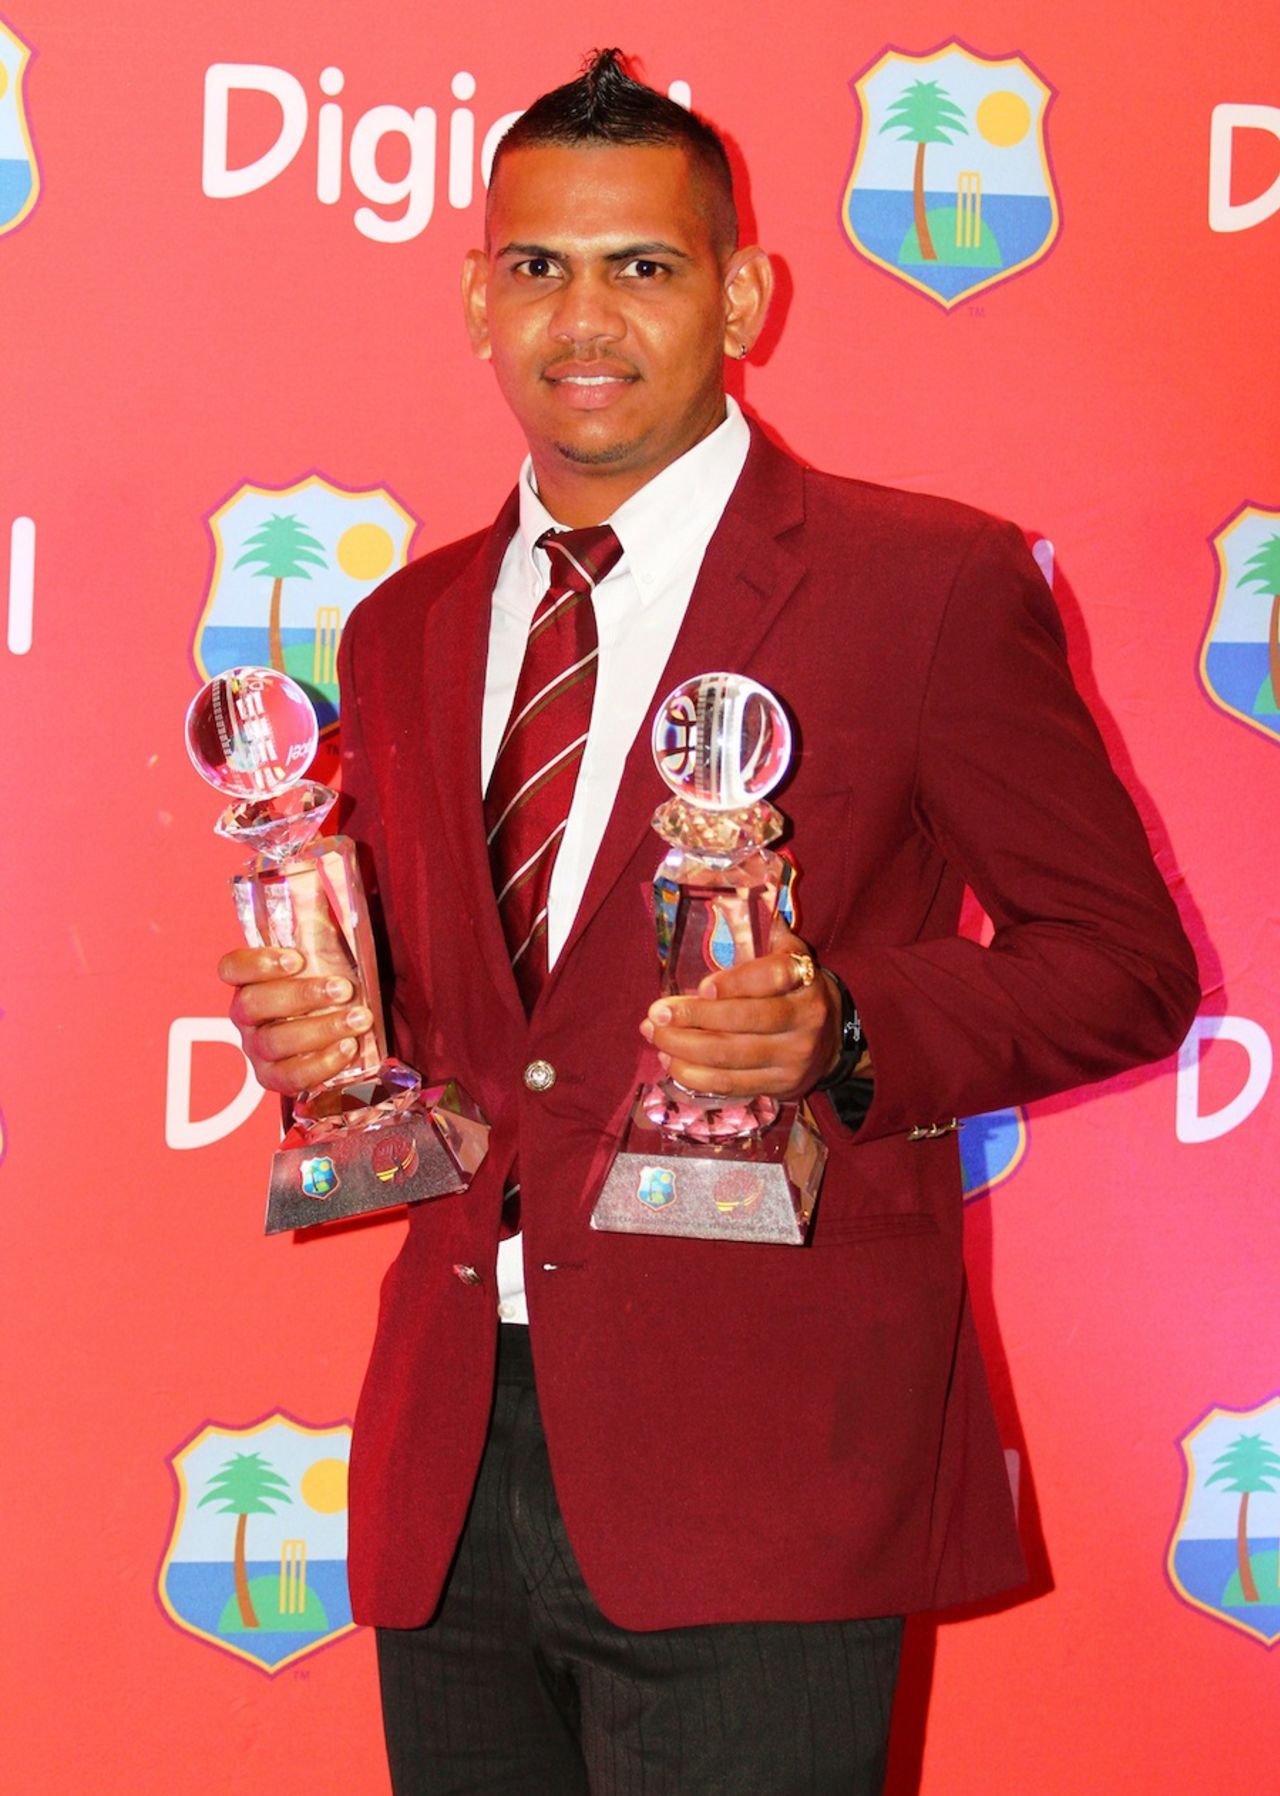 Sunil Narine was named the West Indies T20 cricketer of the Year, Port-of-Spain, July 4, 2013